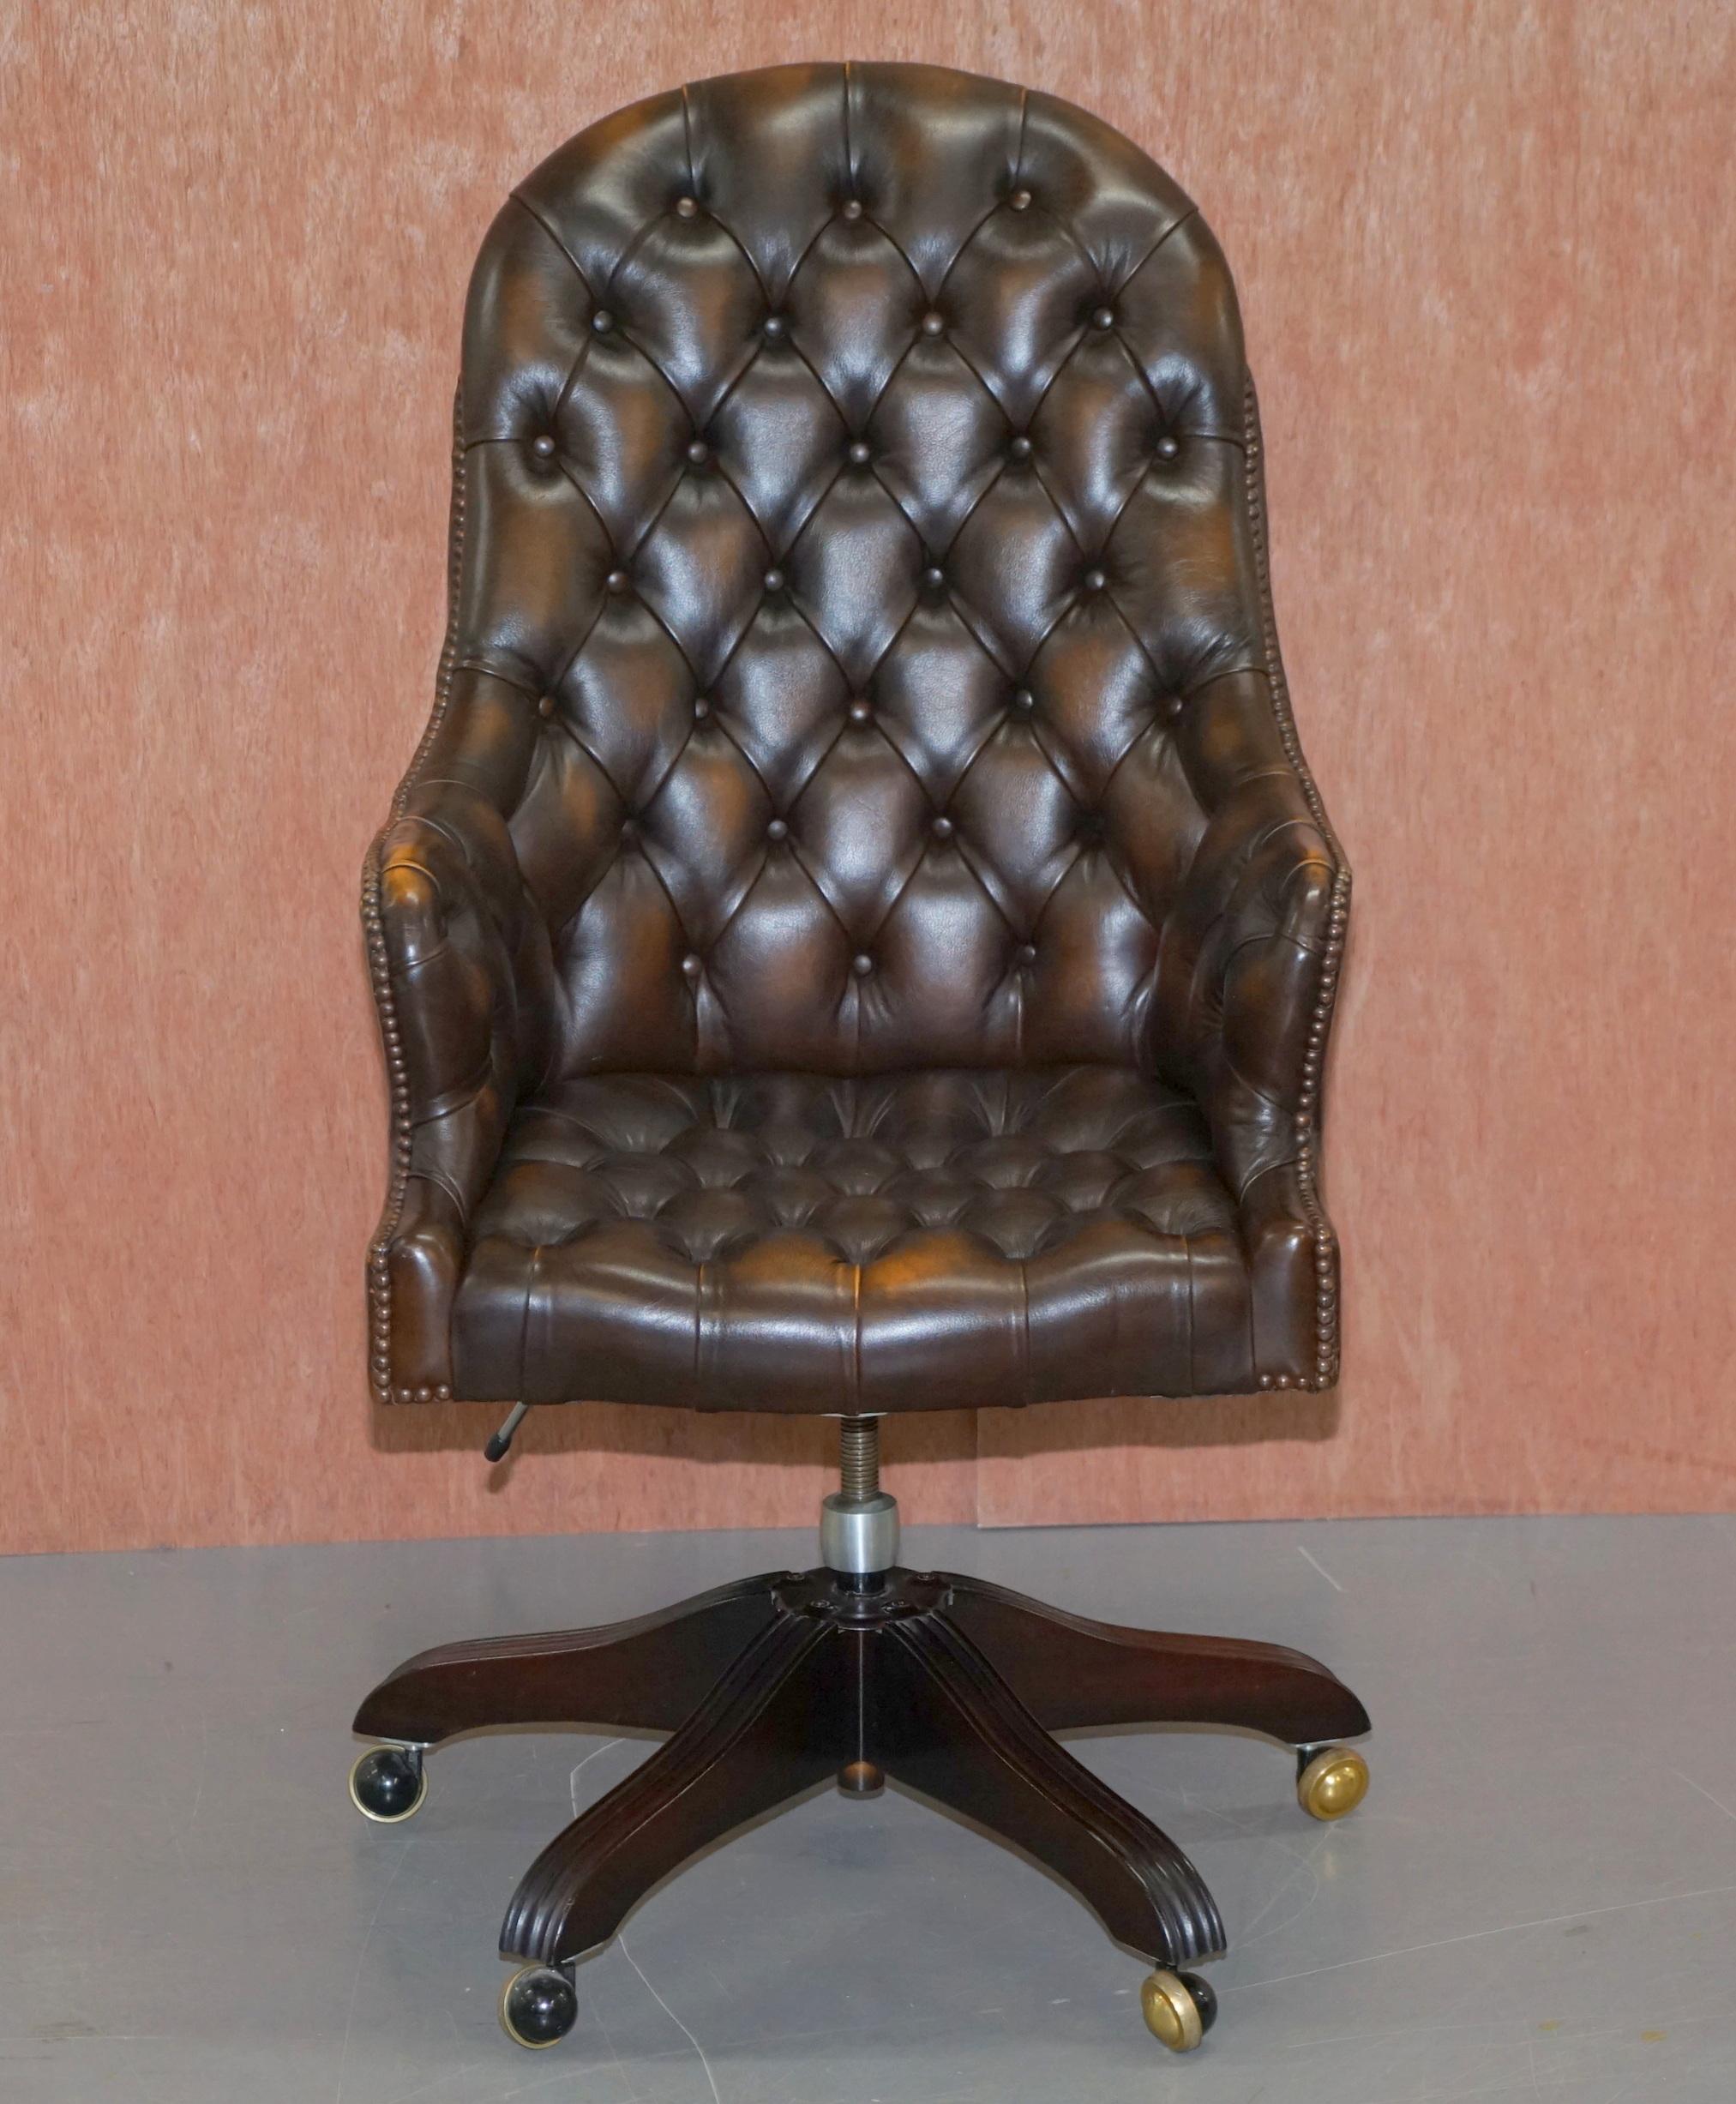 We are delighted to offer for sale this lovely original vintage wade upholstery hand dyed chestnut brown leather Chesterfield tufted captains chair

A very good looking well made and comfortable directors chair. Its Chesterfield buttoned both back